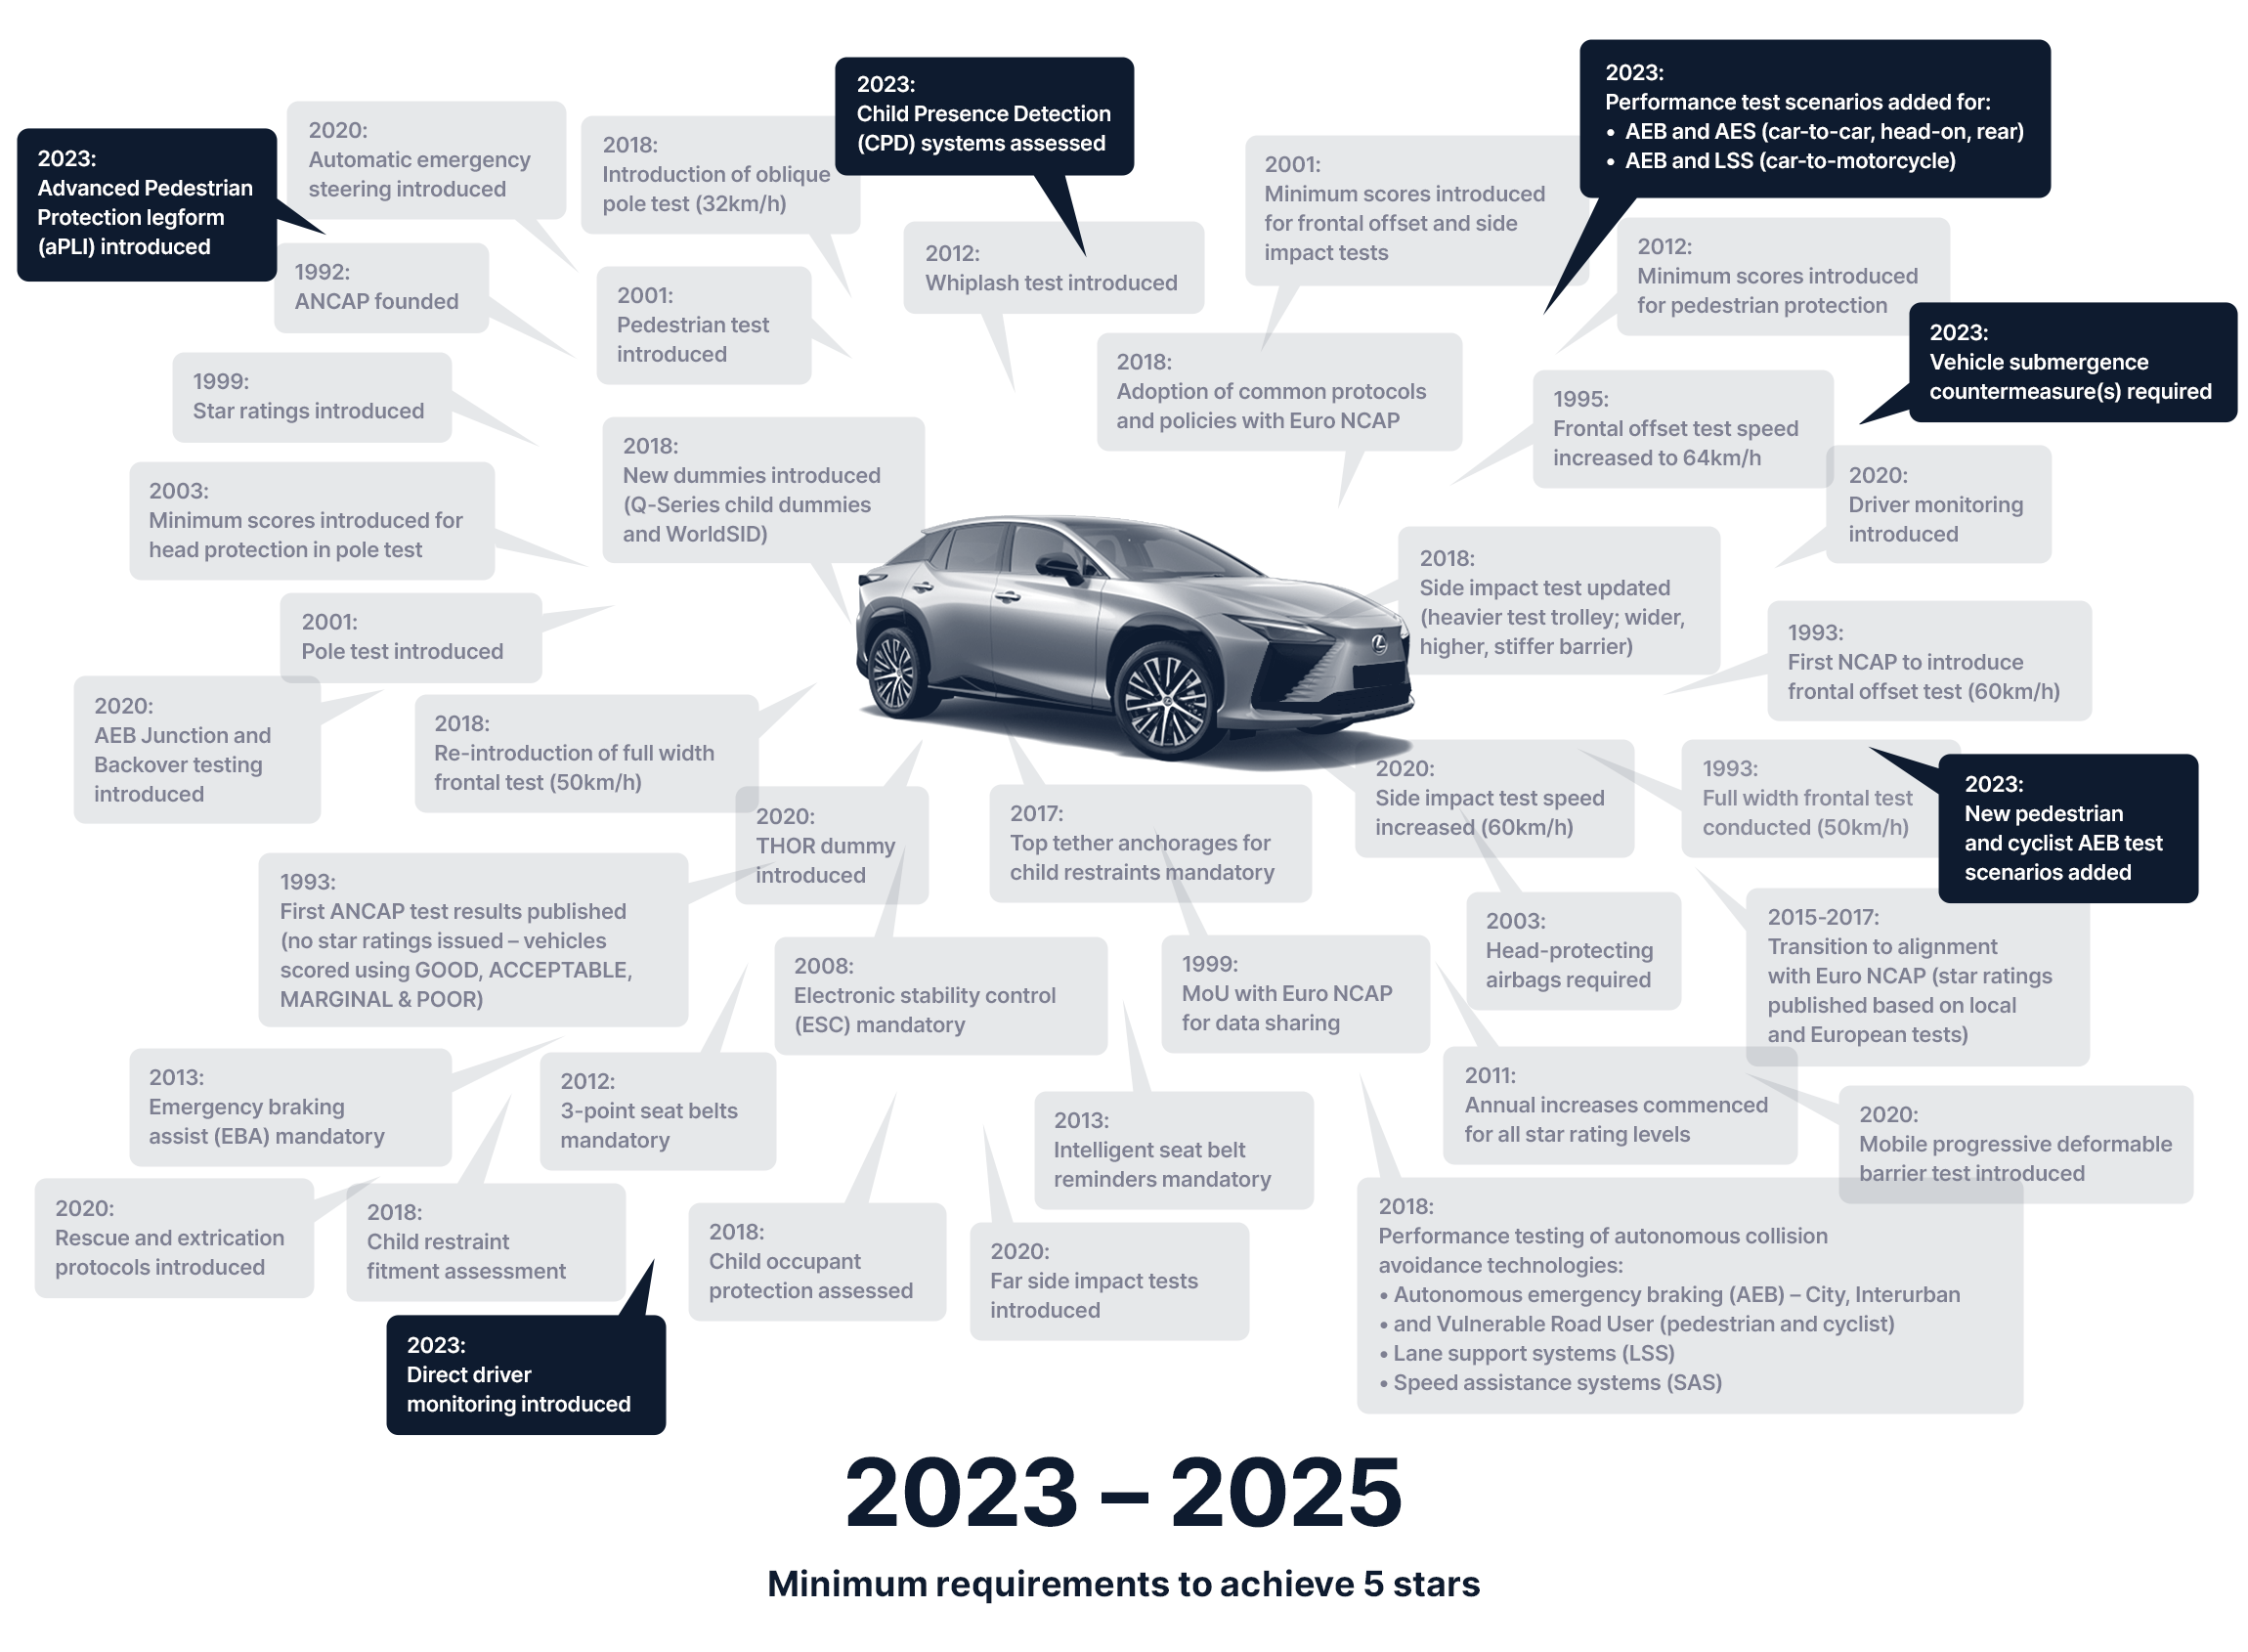 Minimum requirements to achieve an ANCAP Safety Rating in 2023 - 2025